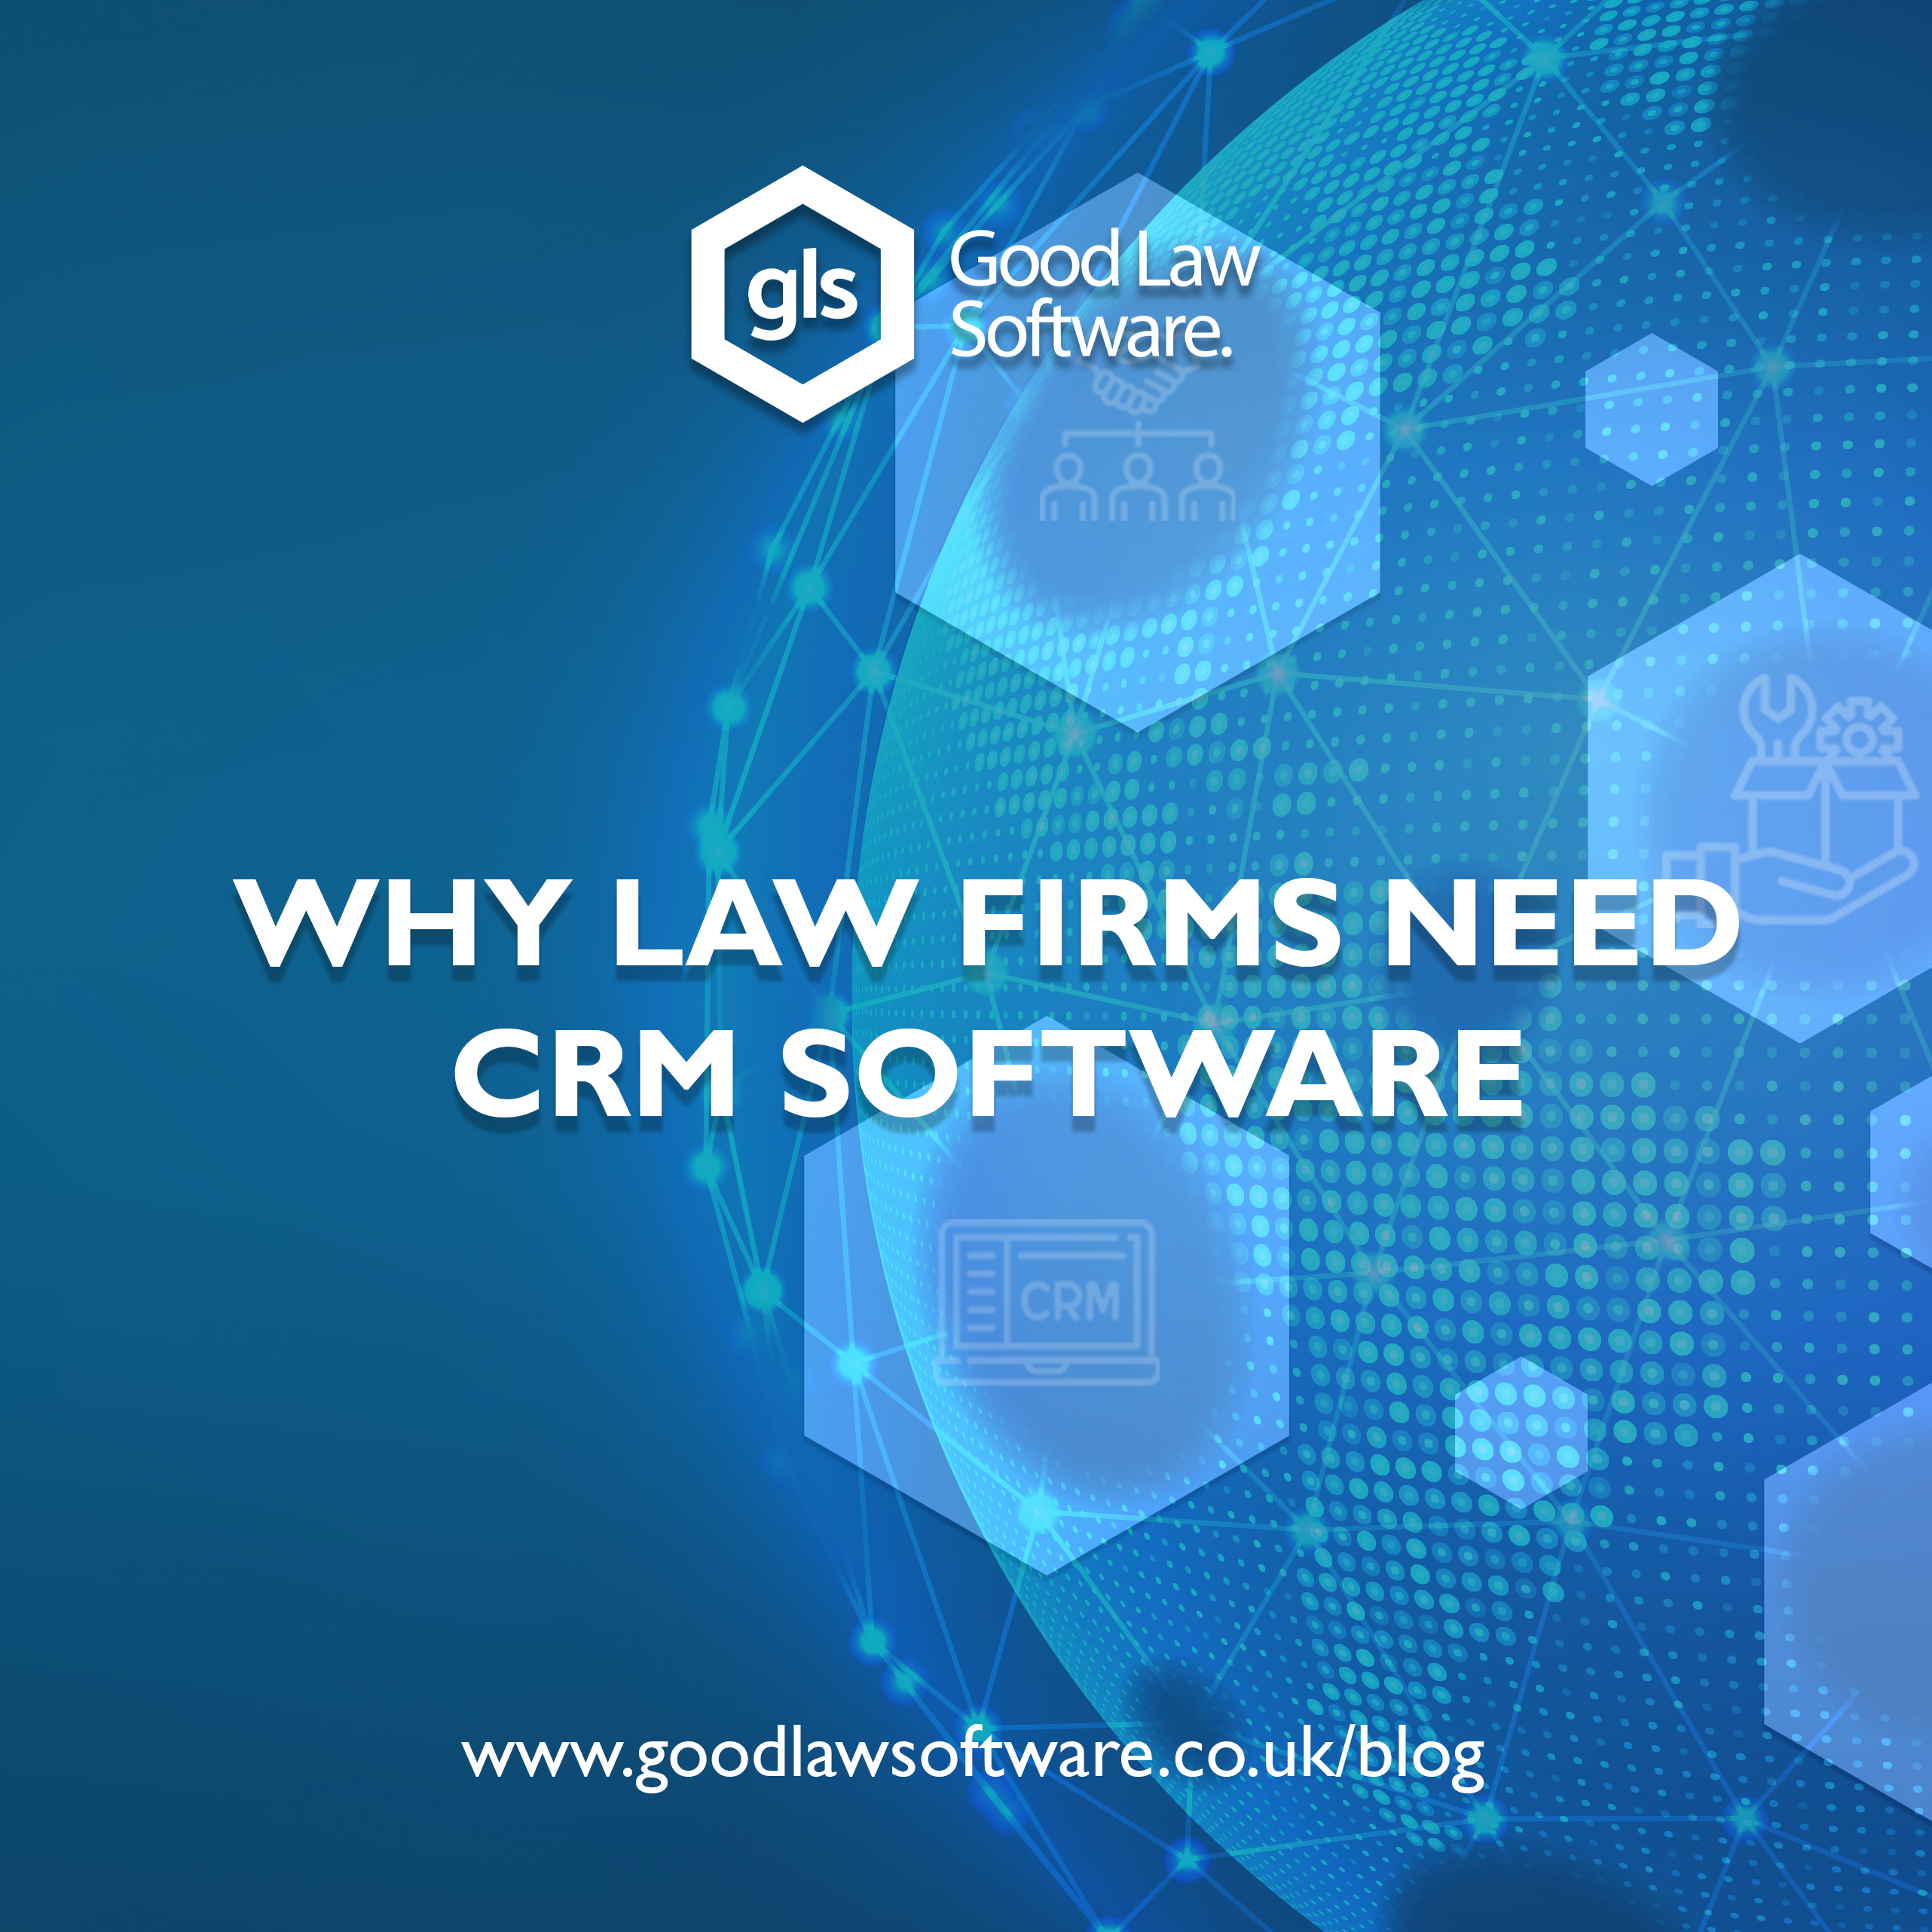 case management software, practice management software, legal accounting software, legaltech, technology for lawyers, case management, immigration, london, united kingdomcase management software, practice management software, legal accounting software, legaltech, technology for lawyers, case management, immigration, london, united kingdom